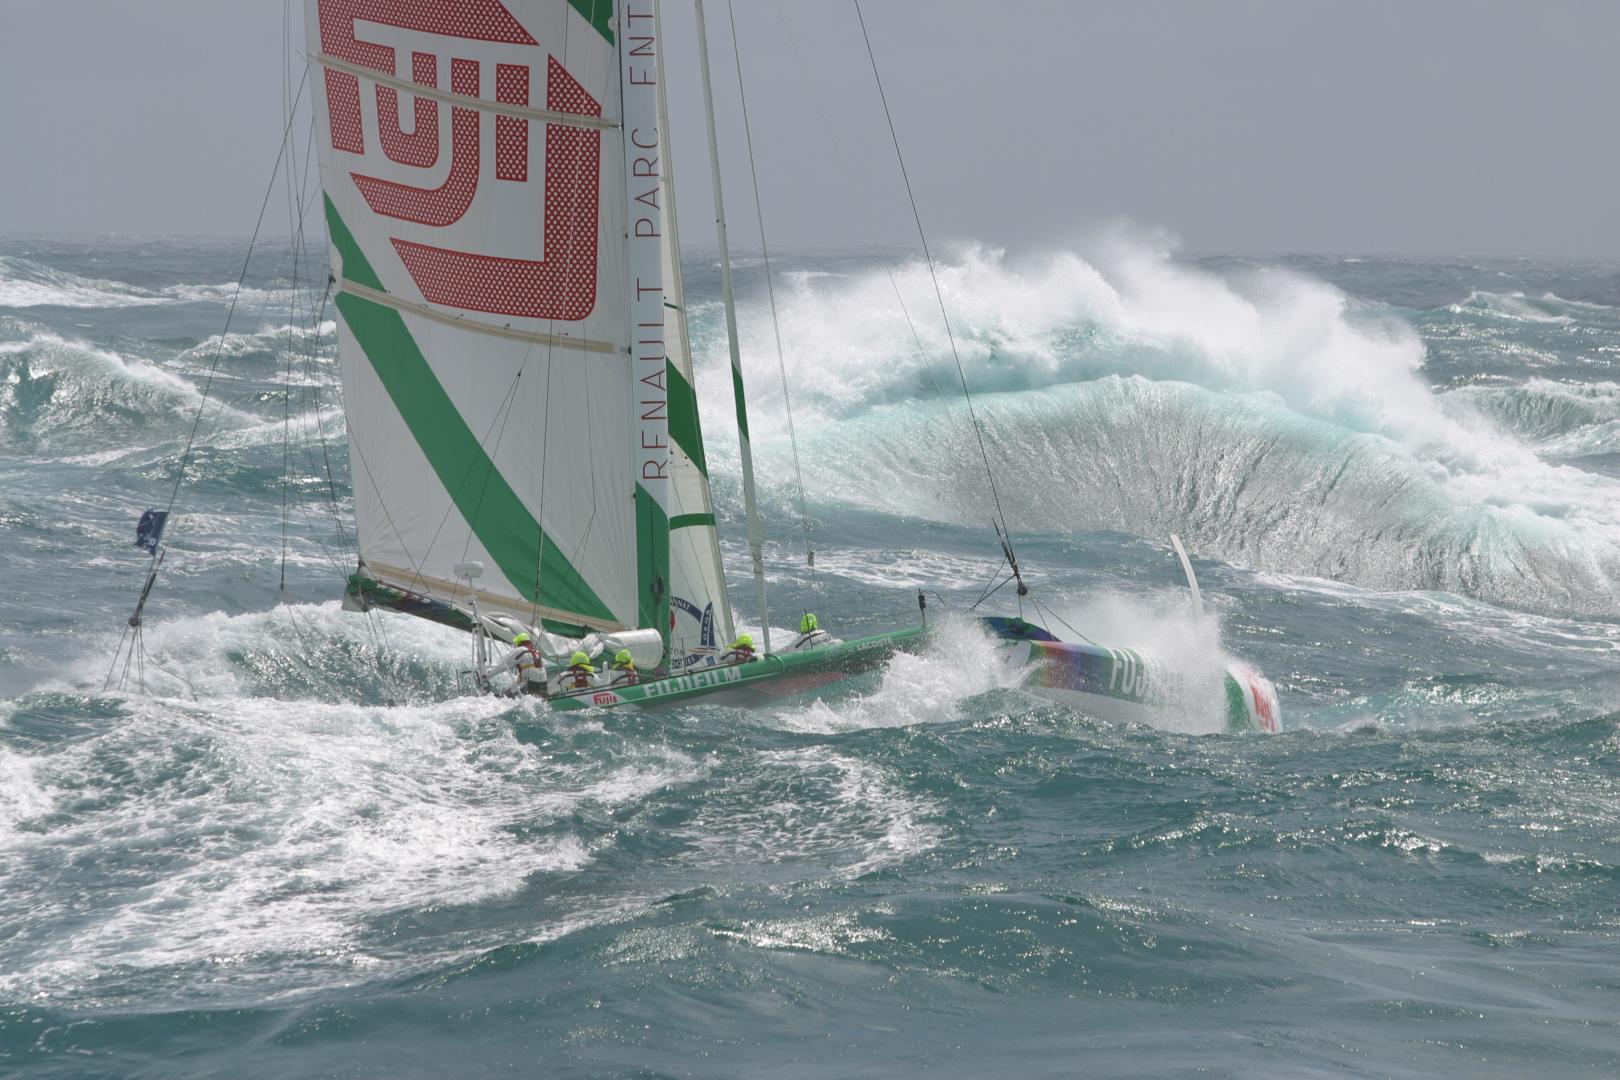 French photographer Gilles Martin-Raget, winner of the Mirabaud Yacht Racing Image of the Century